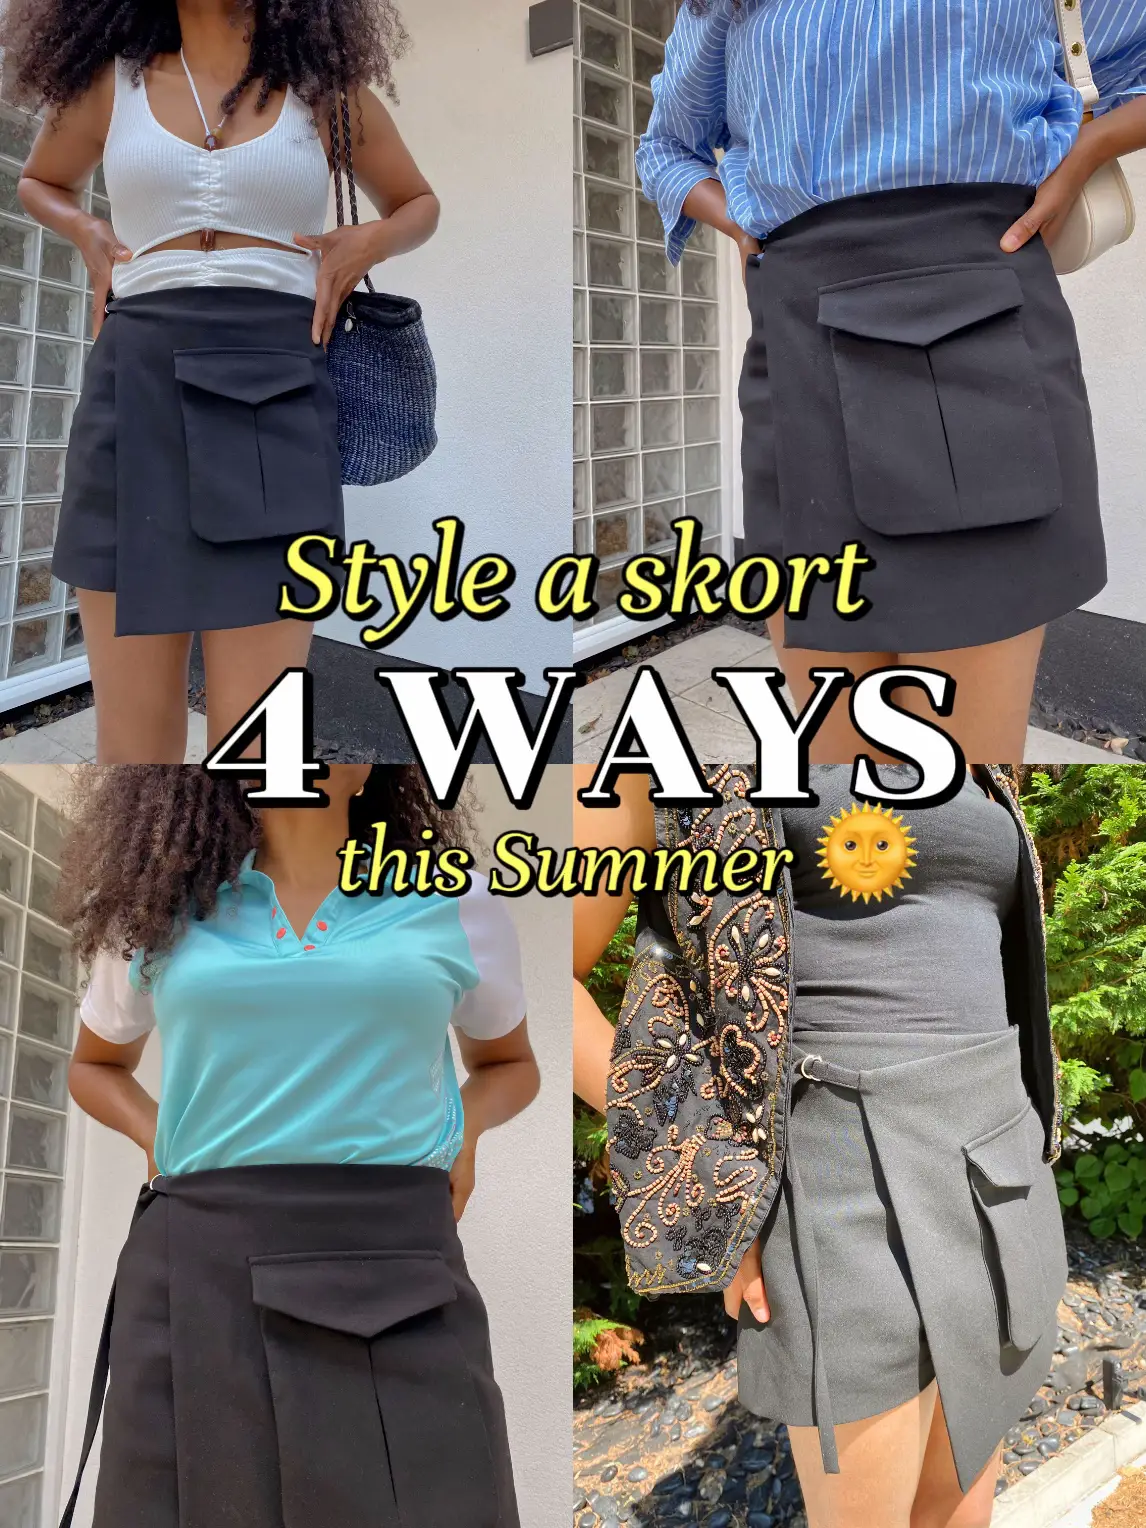 4 WAYS to style a SKORT this Summer ☀️, Gallery posted by CHI-CHI